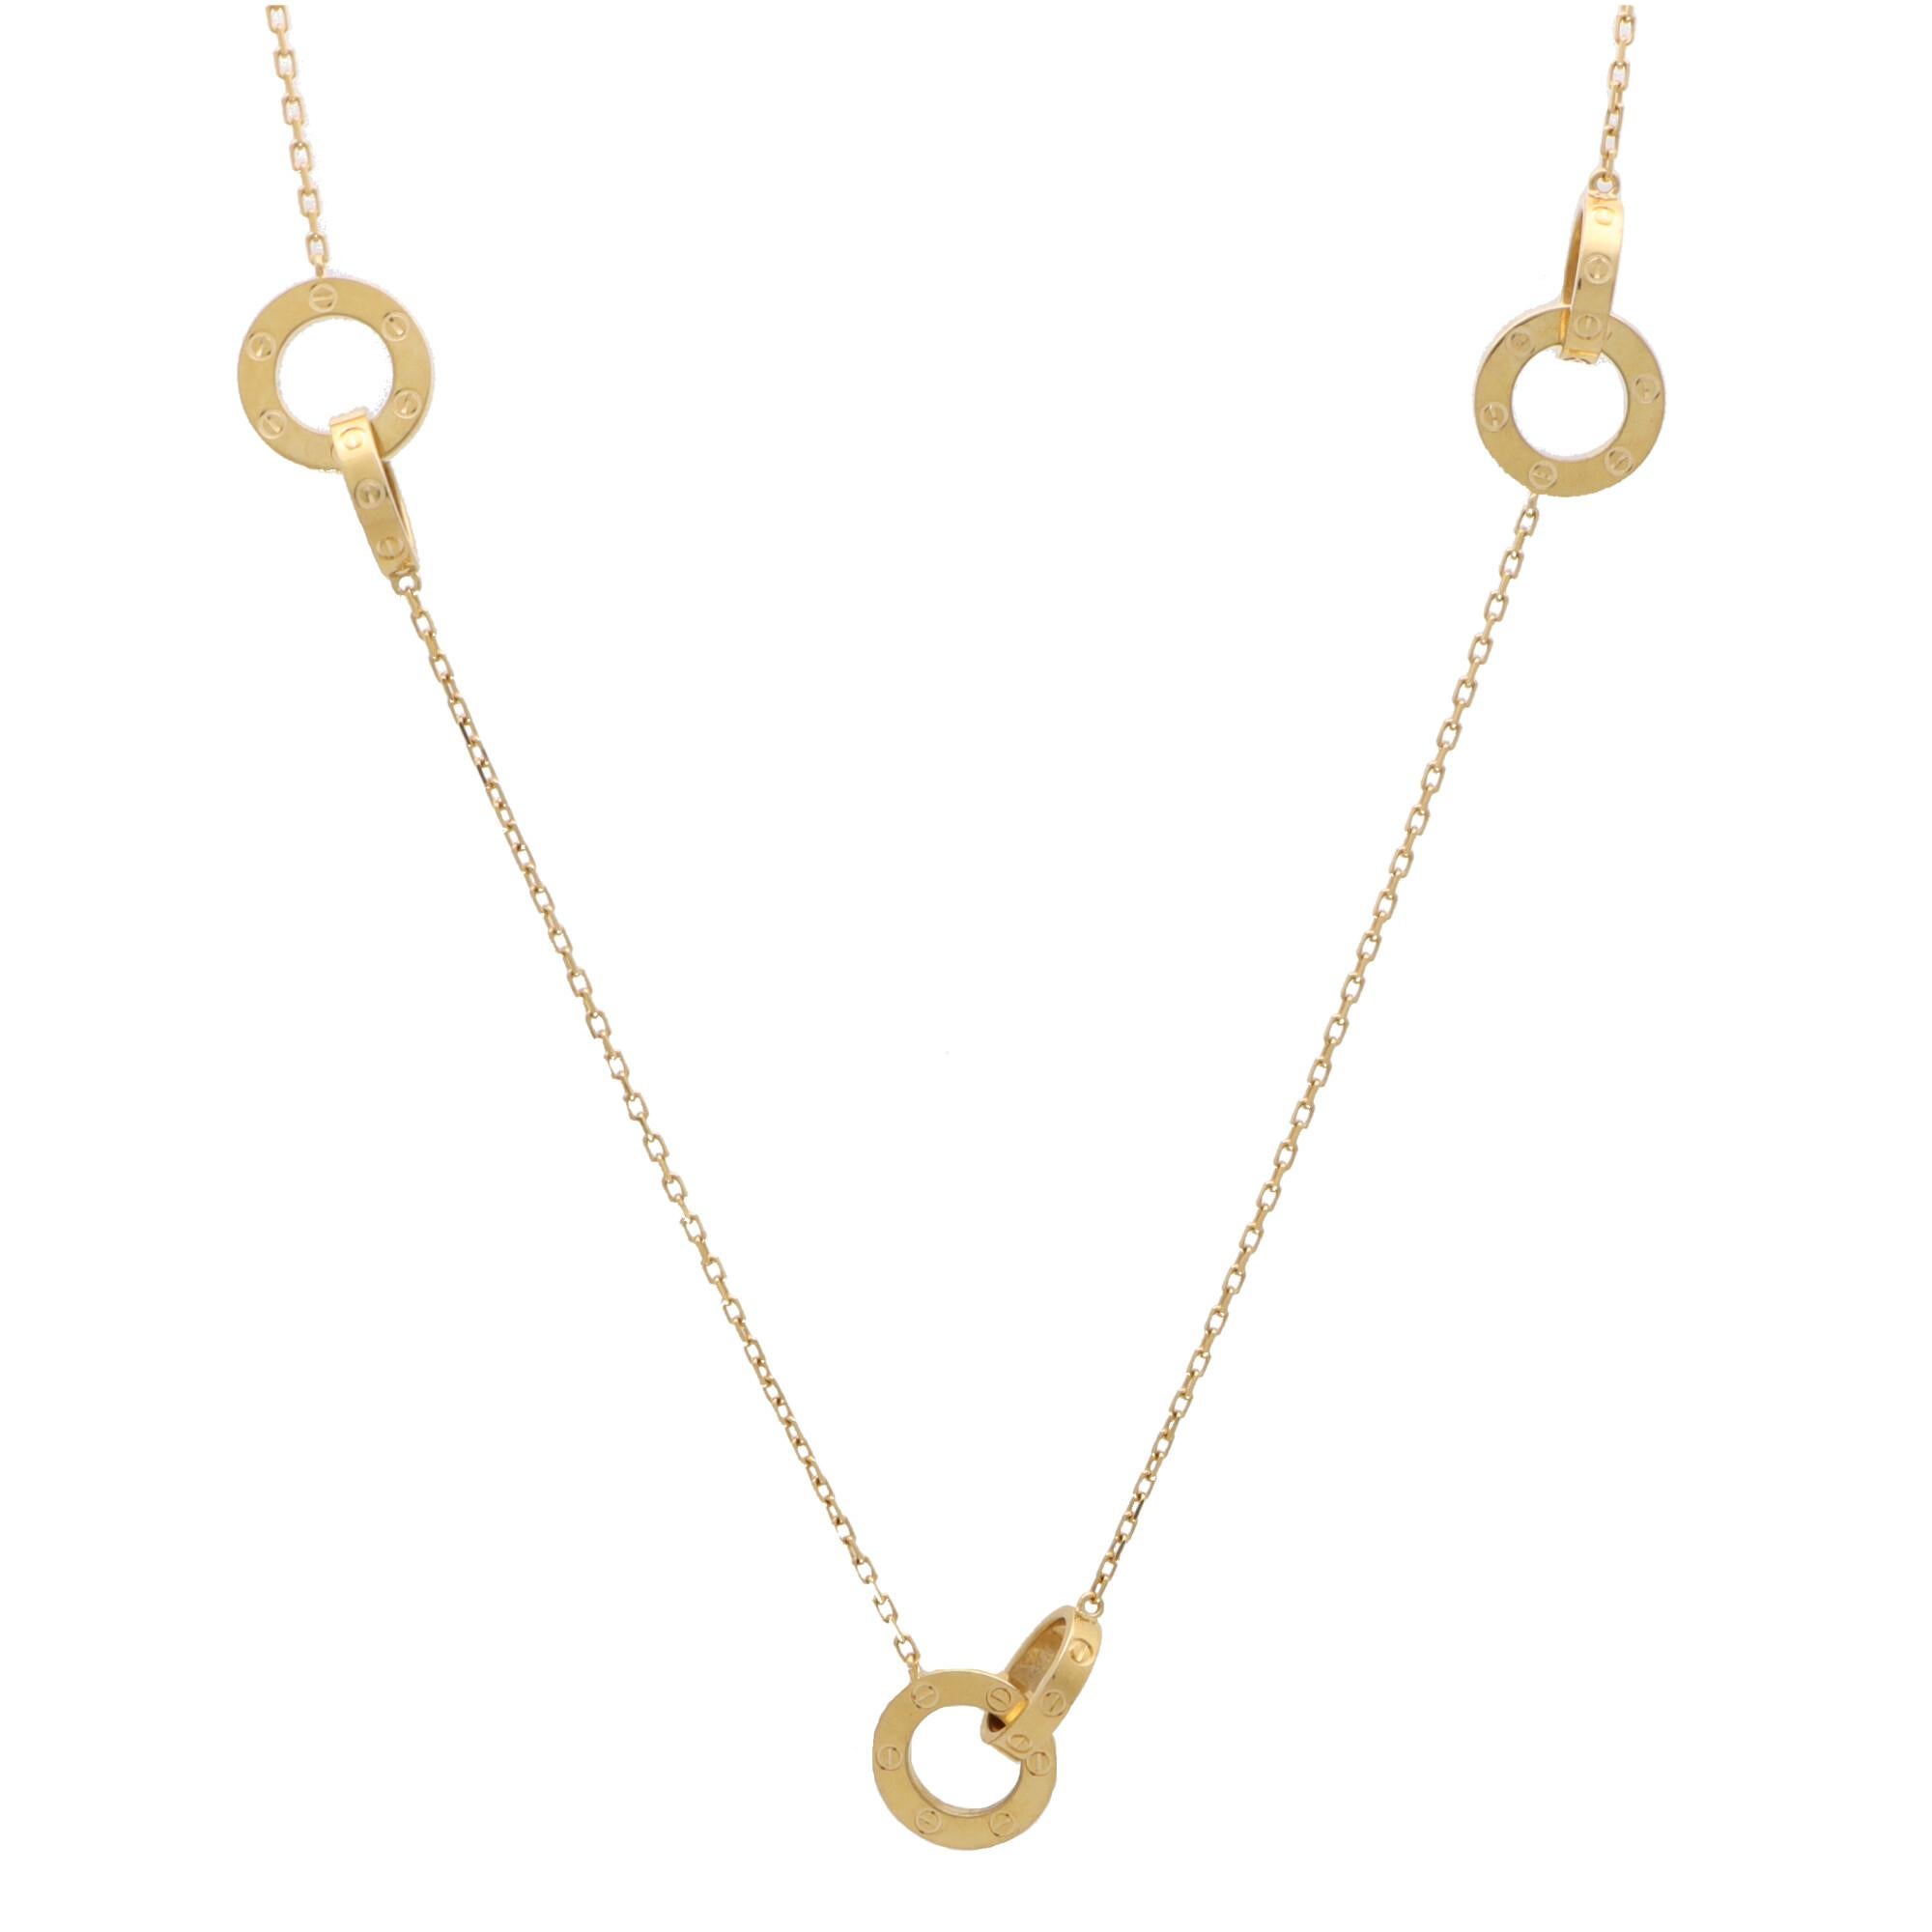 Modern Vintage Cartier Love Ring Necklace Set in 18k Yellow Gold